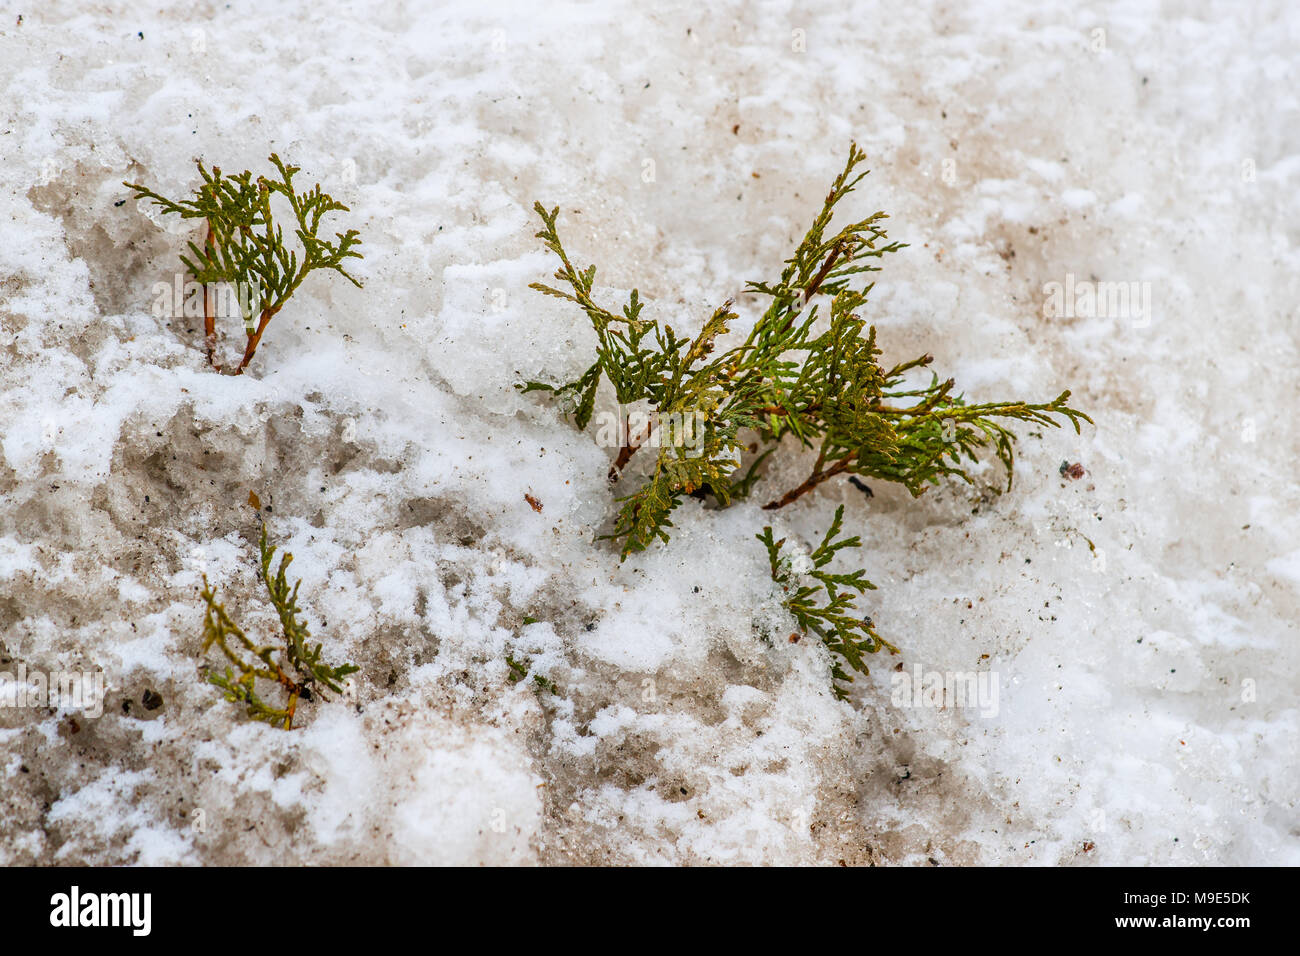 Few green twigs of a small thuja tree stick out a large pile of a dirty melting snow. Early spring season Stock Photo